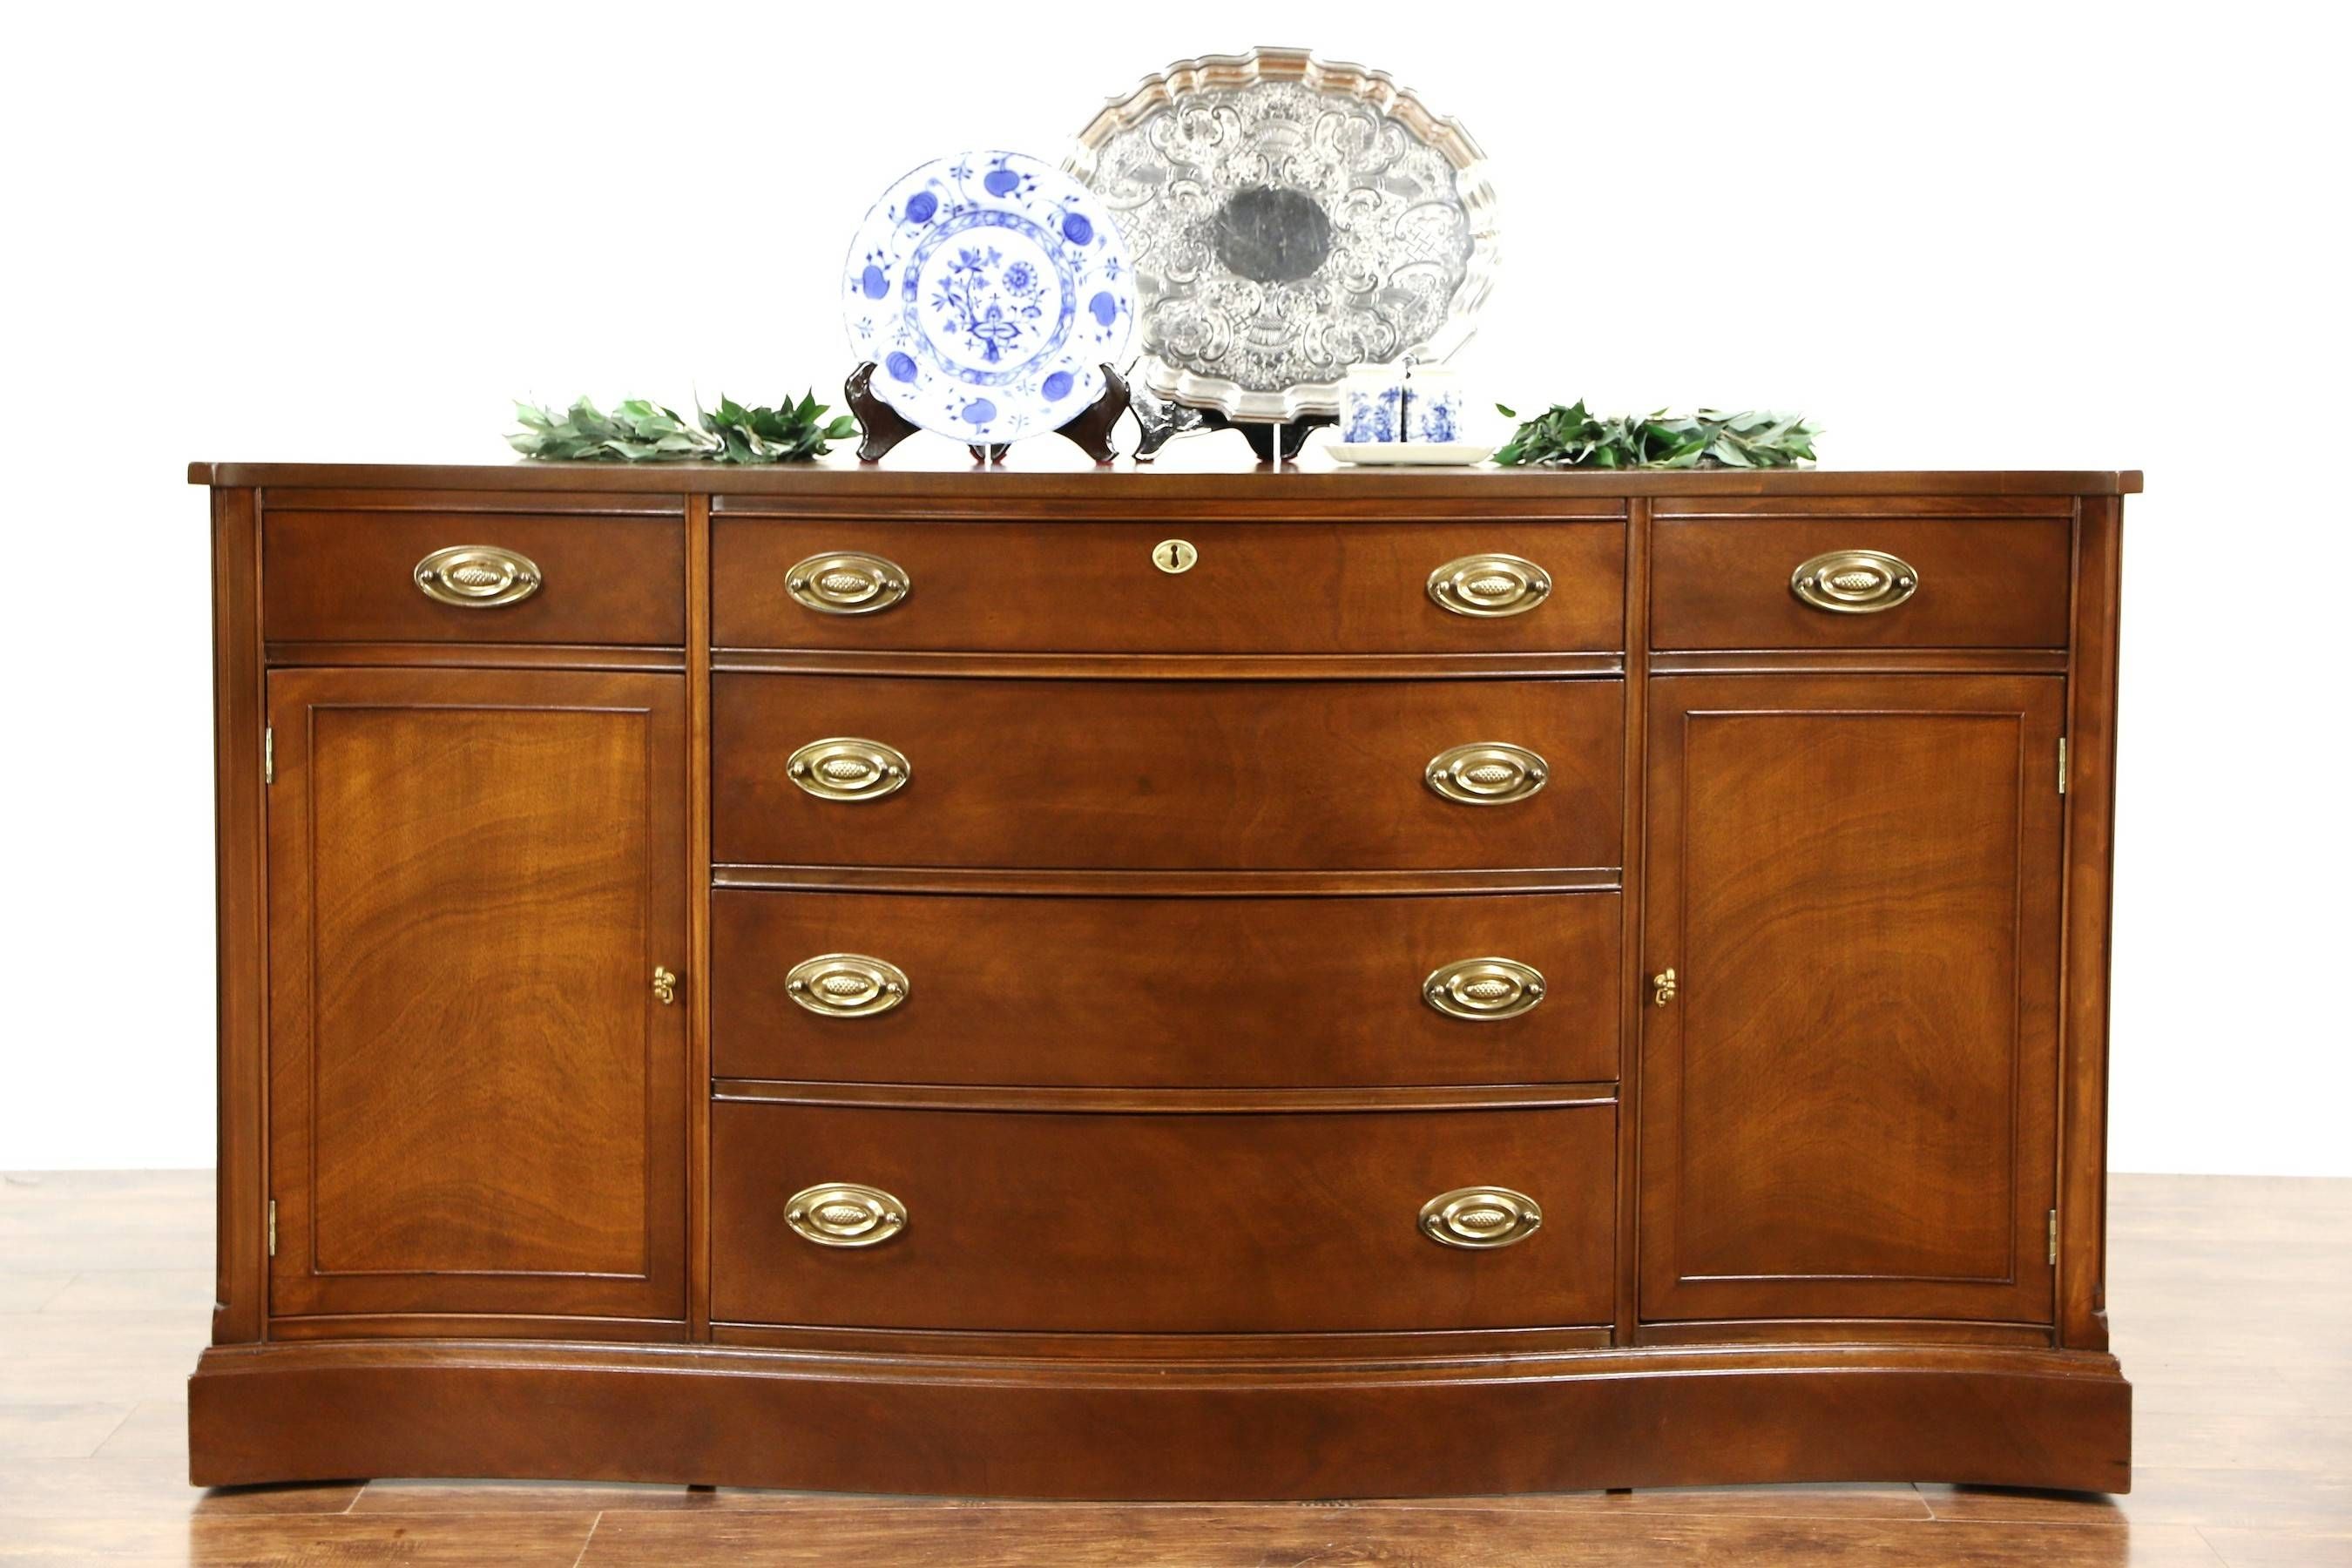 Traditional Vintage Mahogany Sideboard, Server Or Buffet Inside Mahogany Sideboard Furniture (View 8 of 15)